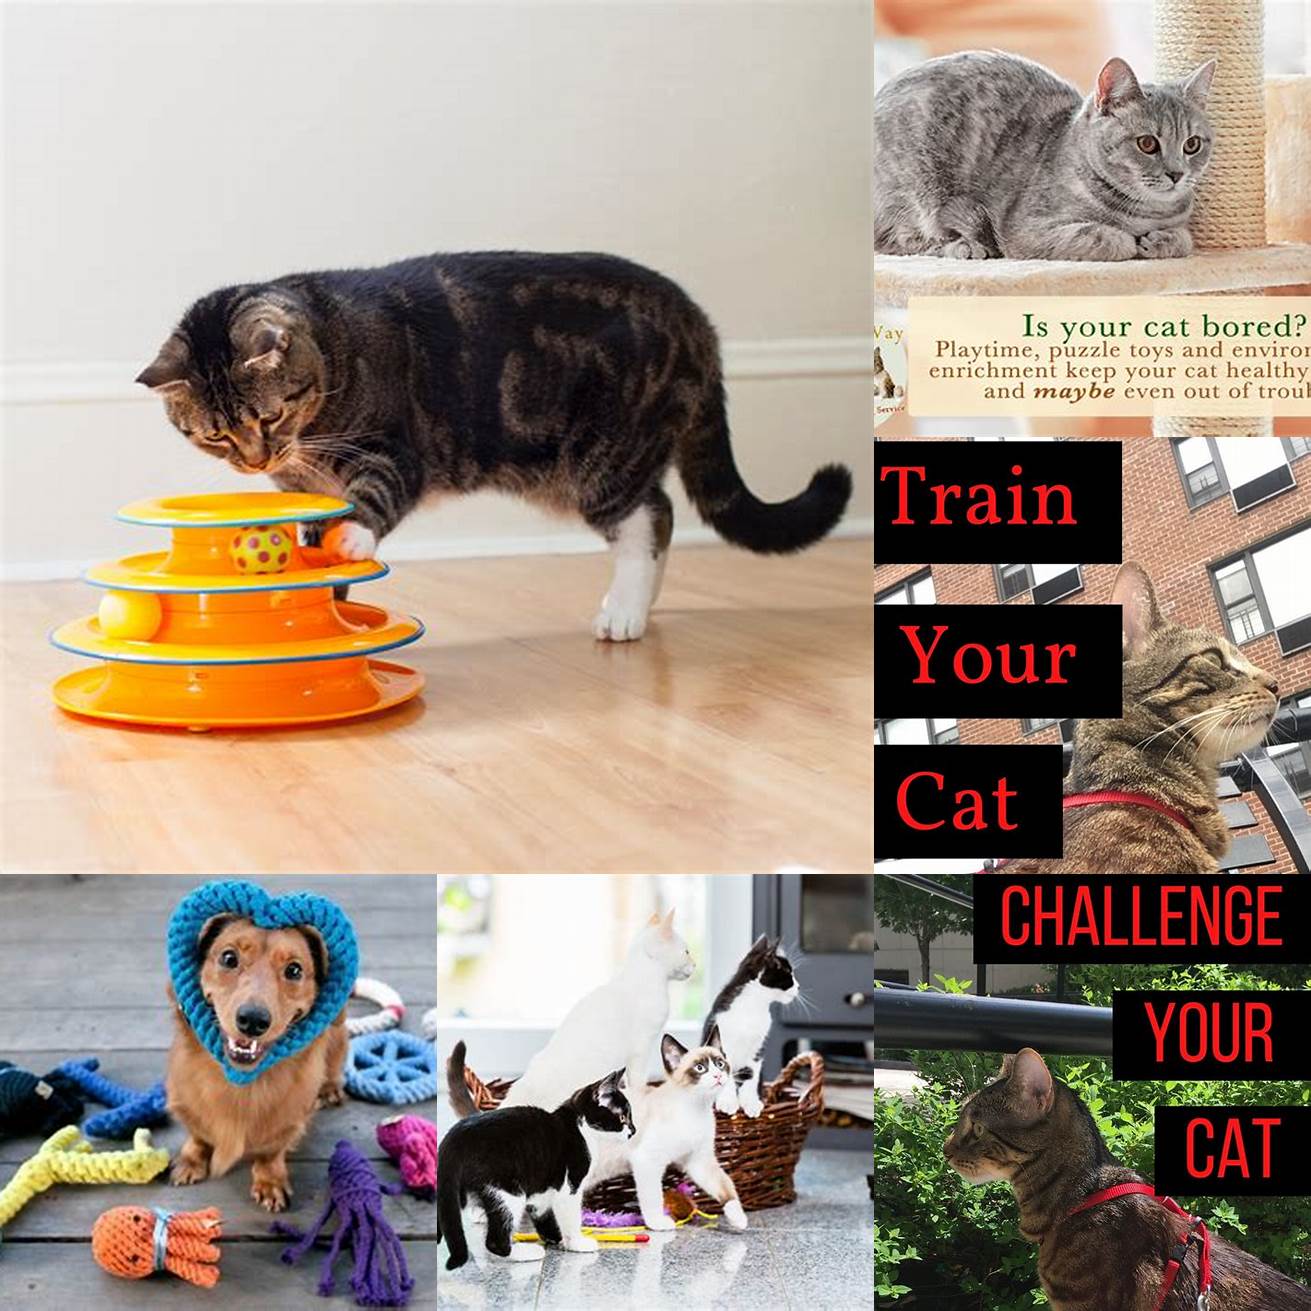 2 Mental Stimulation Walking can be a great way to stimulate your cats mind and senses